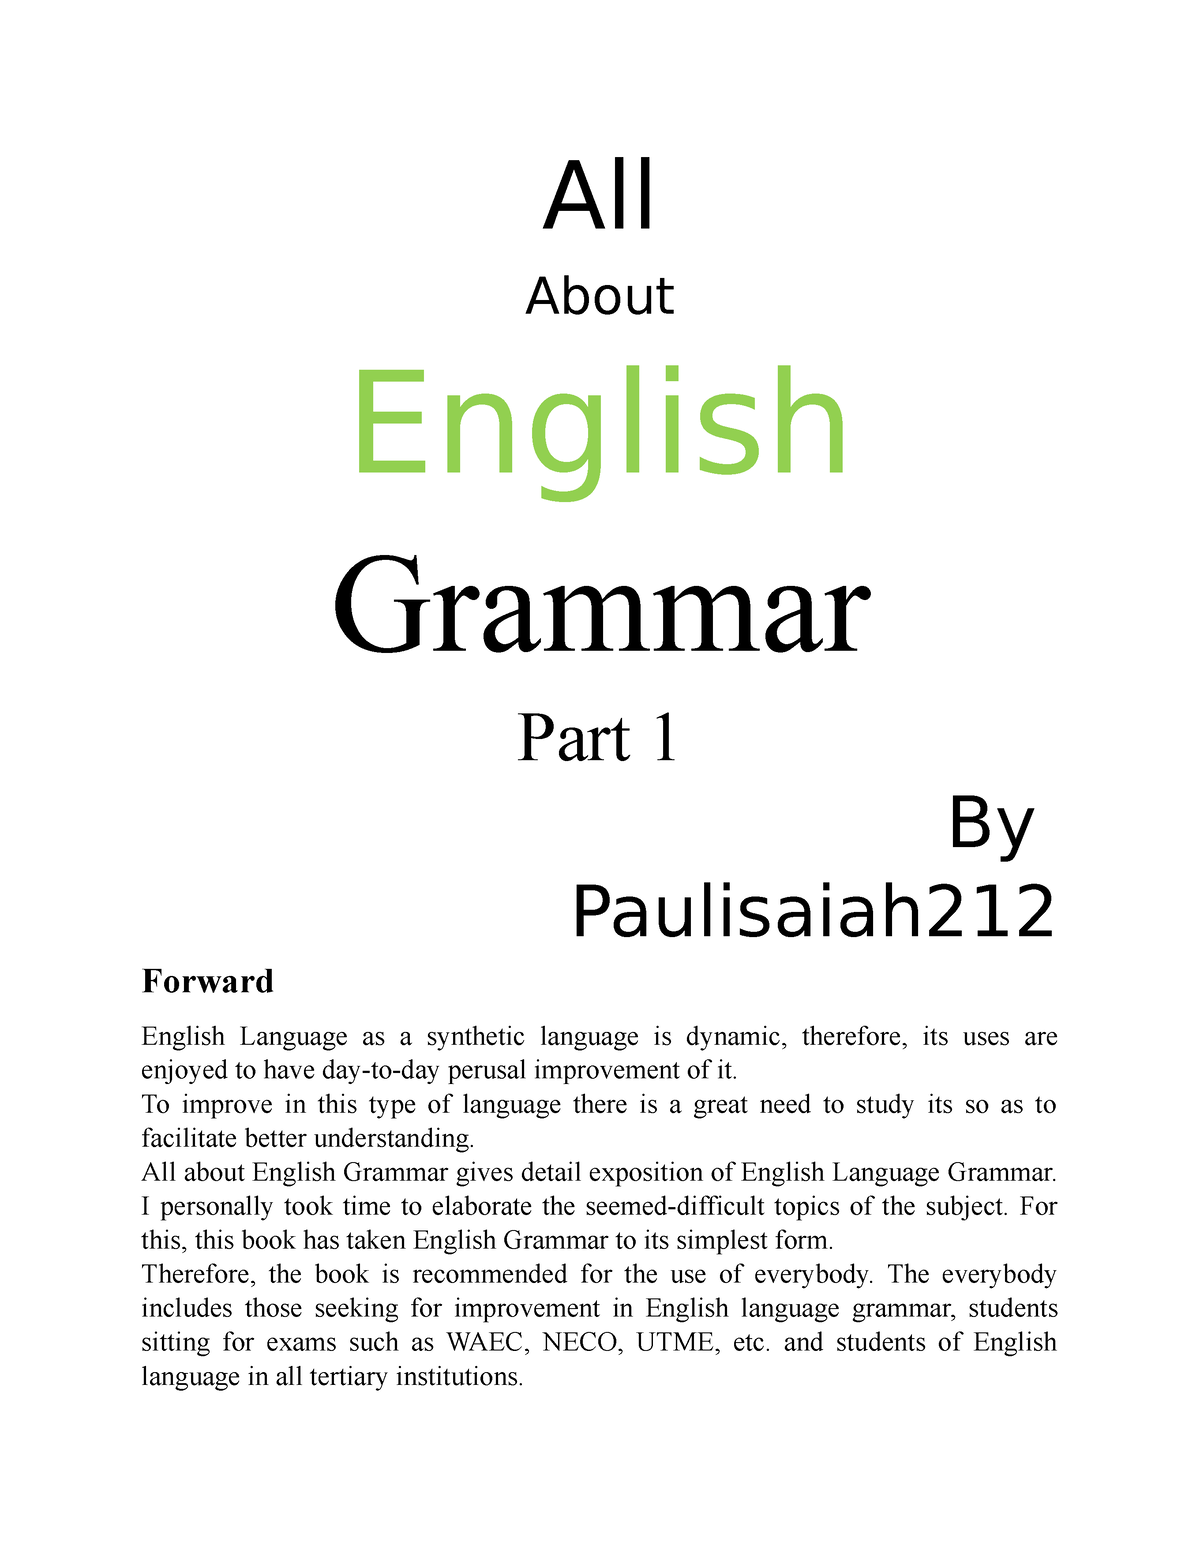 all-about-english-grammar-all-about-english-grammar-part-1-by